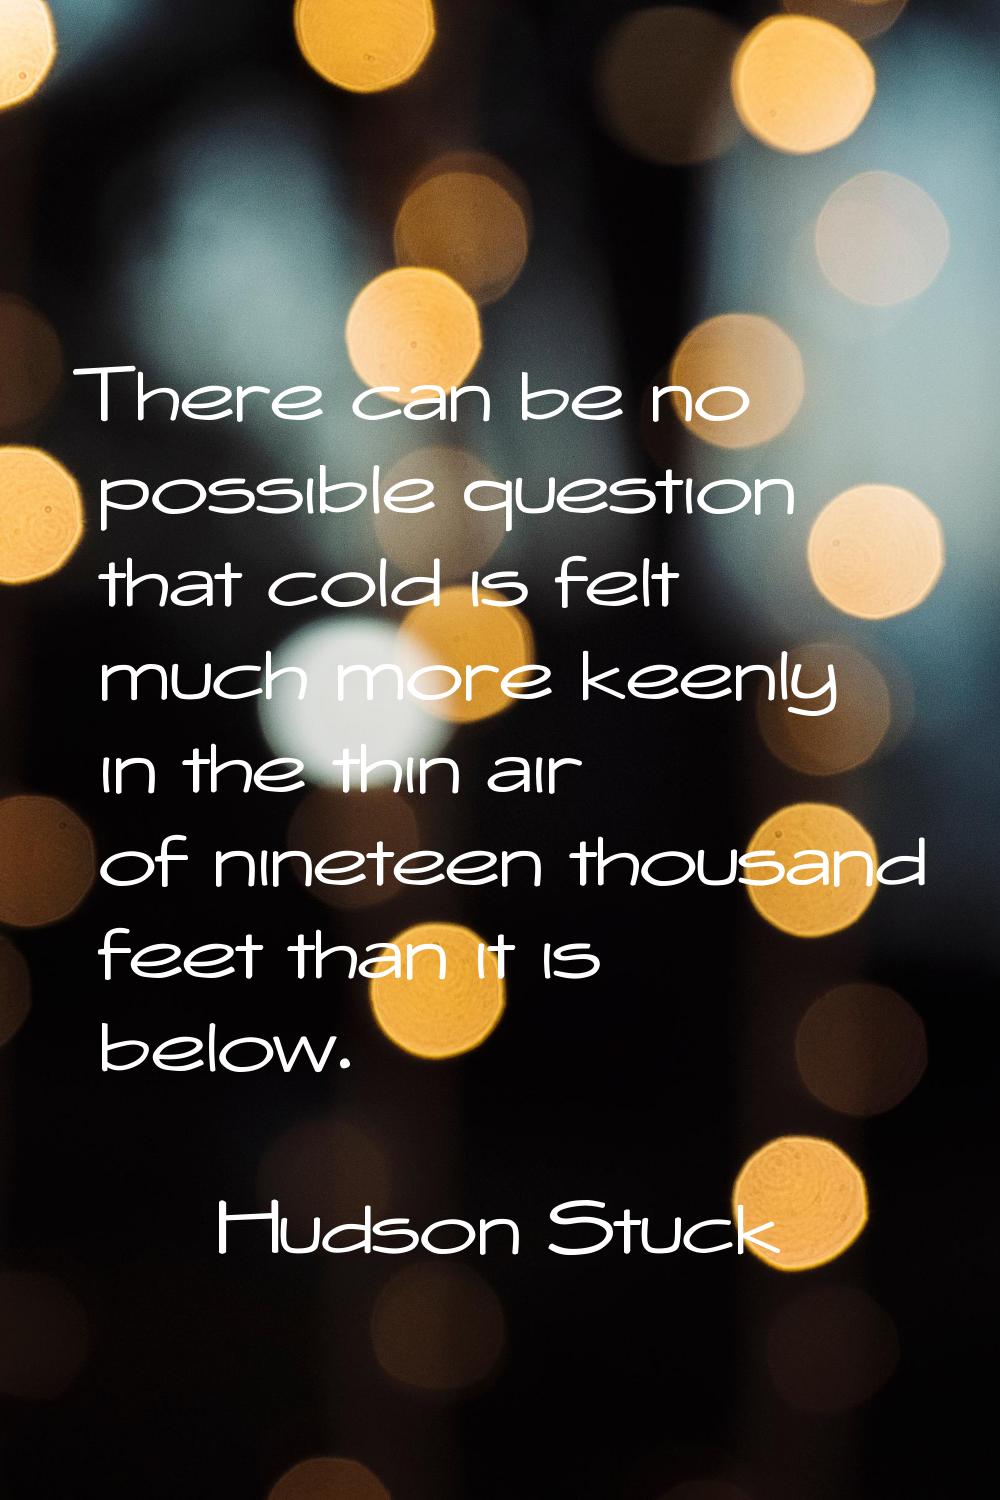 There can be no possible question that cold is felt much more keenly in the thin air of nineteen th